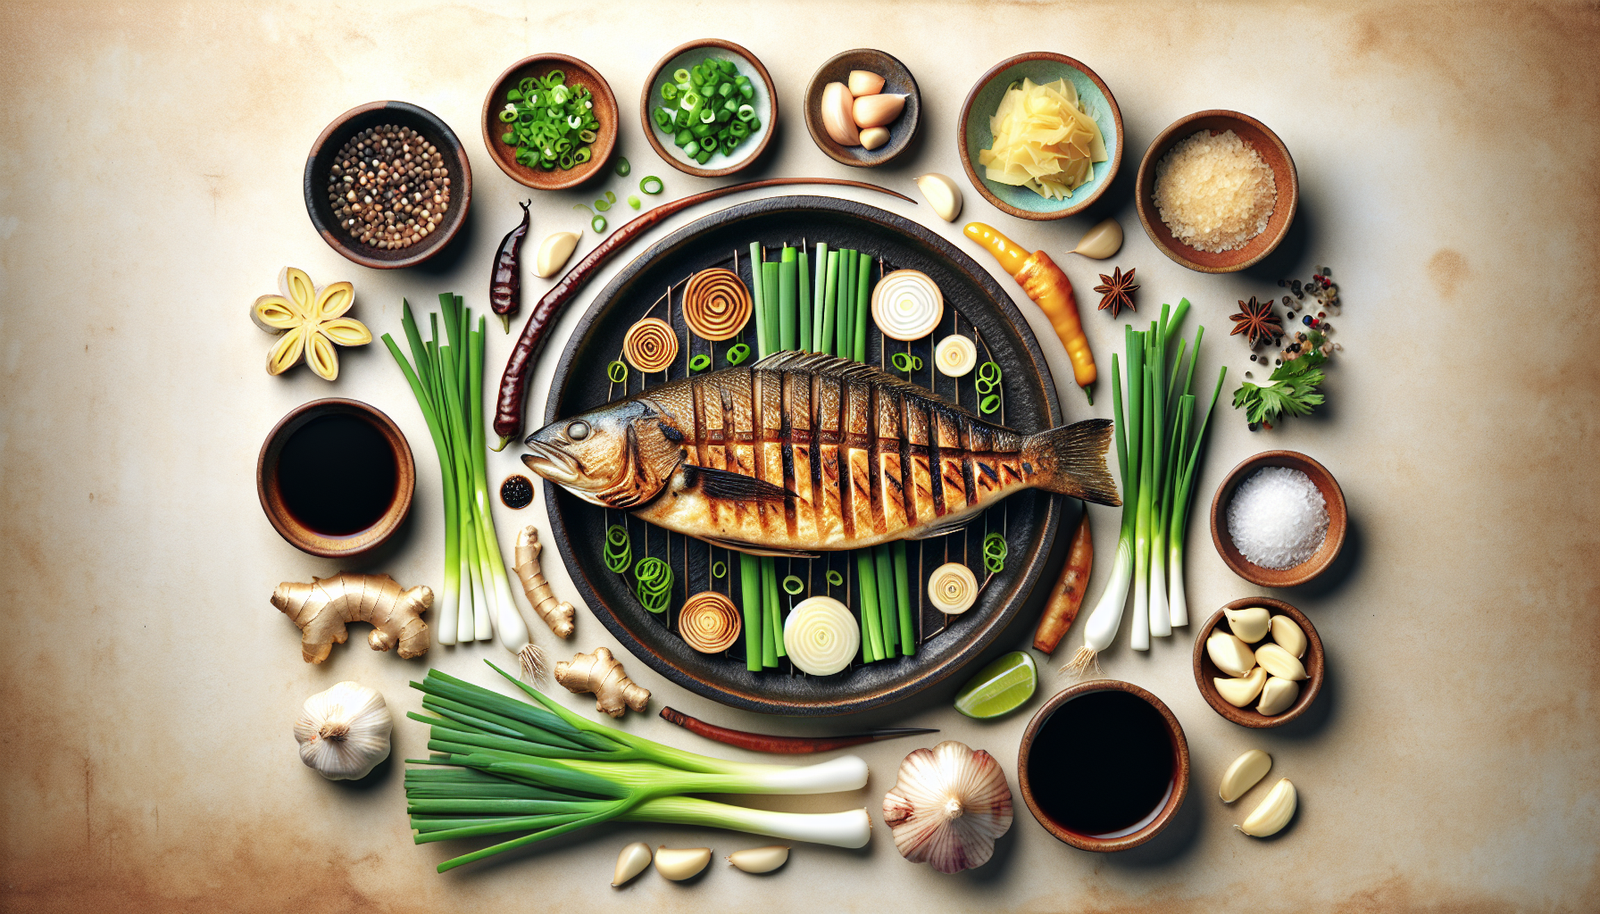 How Do You Properly Season And Prepare Traditional Korean Grilled Fish (gui)?